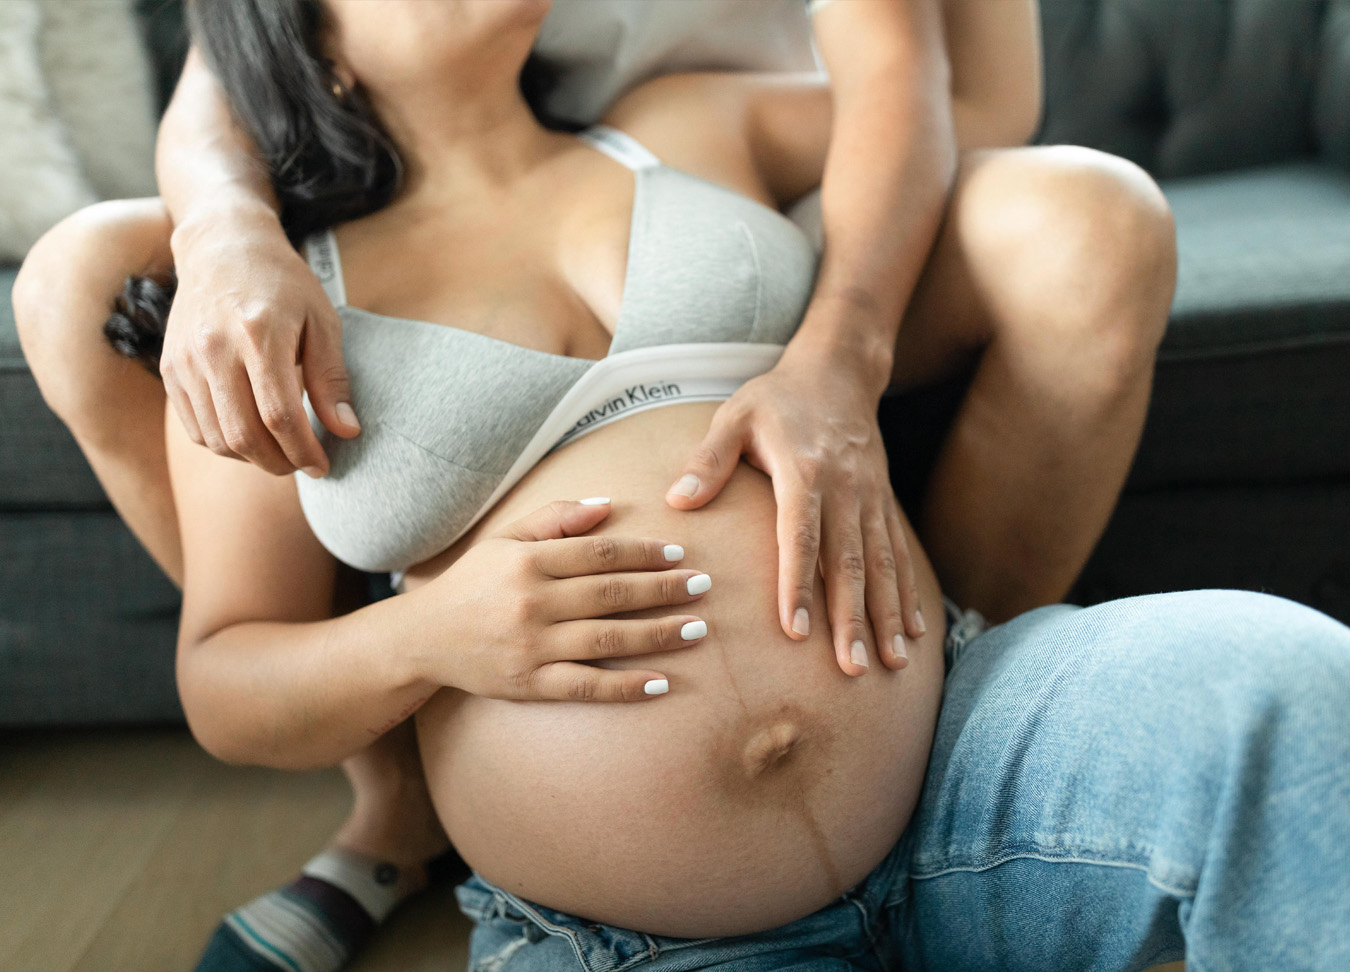 Pregnant woman's belly with her hand on it, embracing her partner sitting above her.